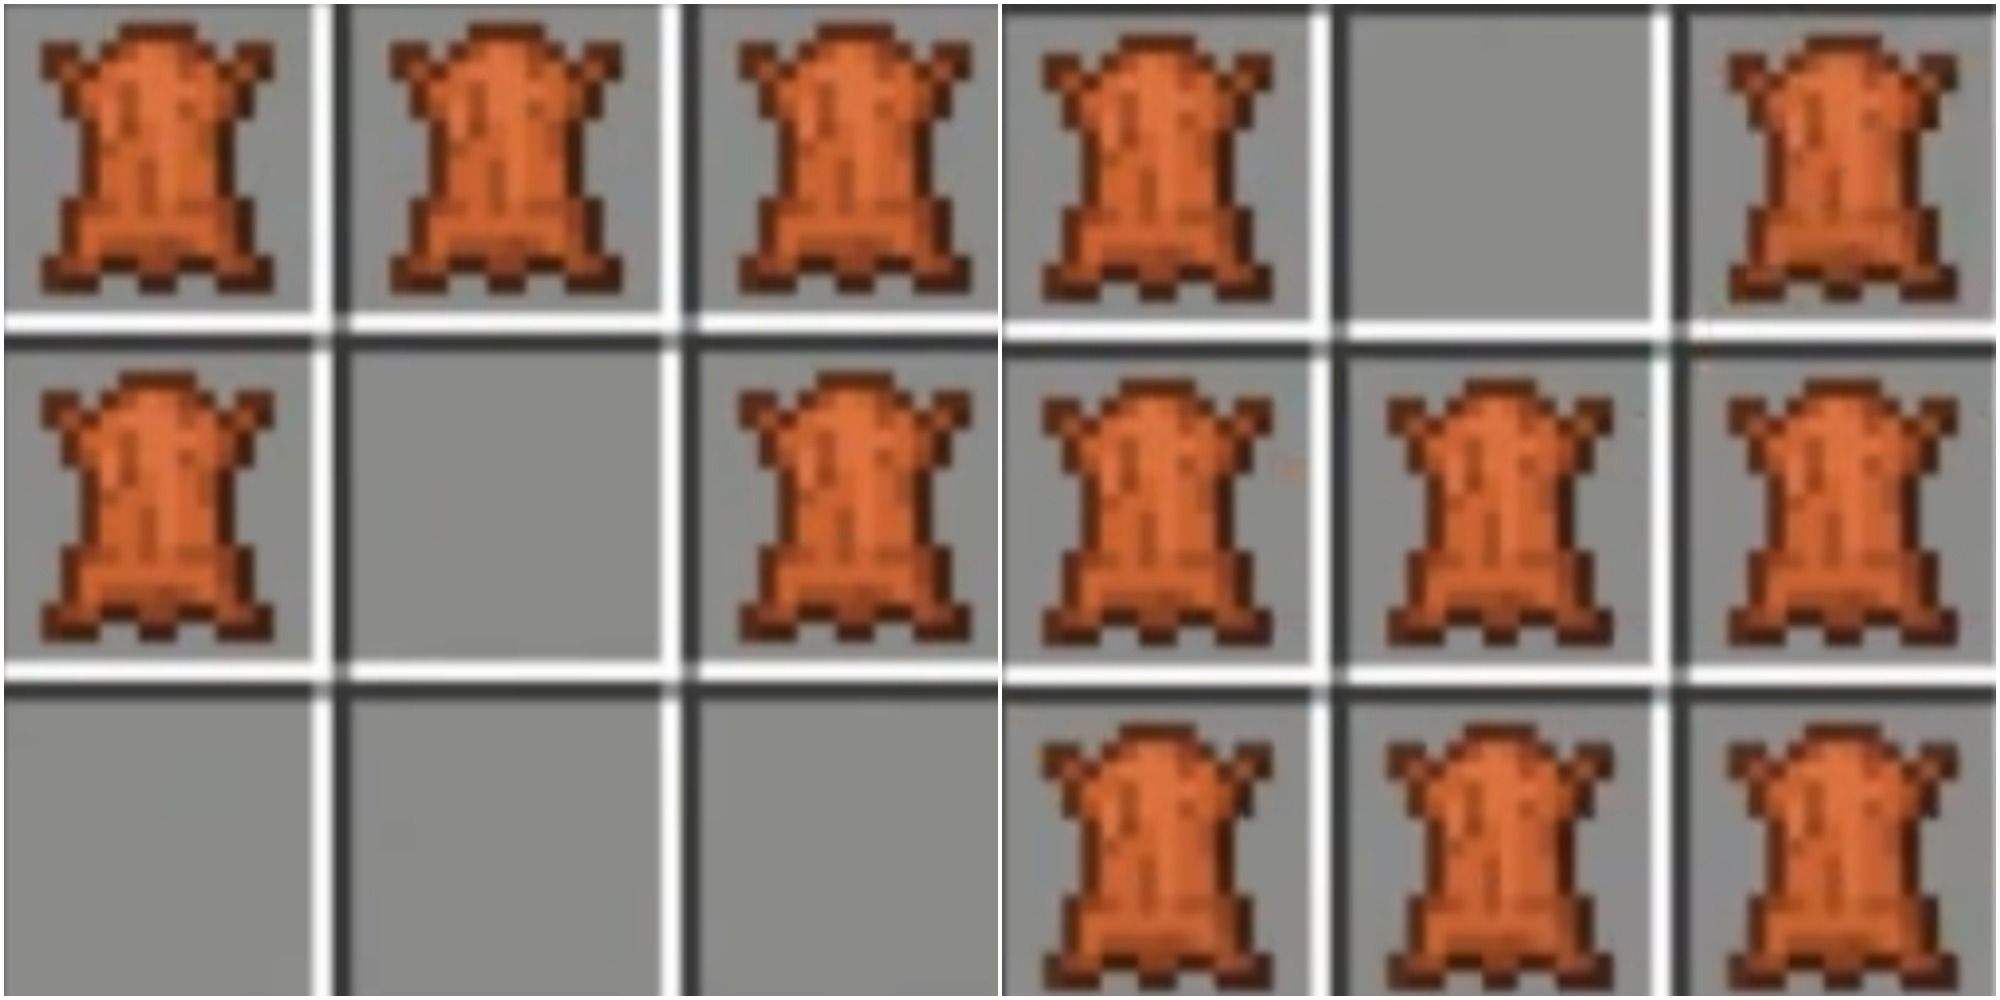 How to get leather armor in Minecraft